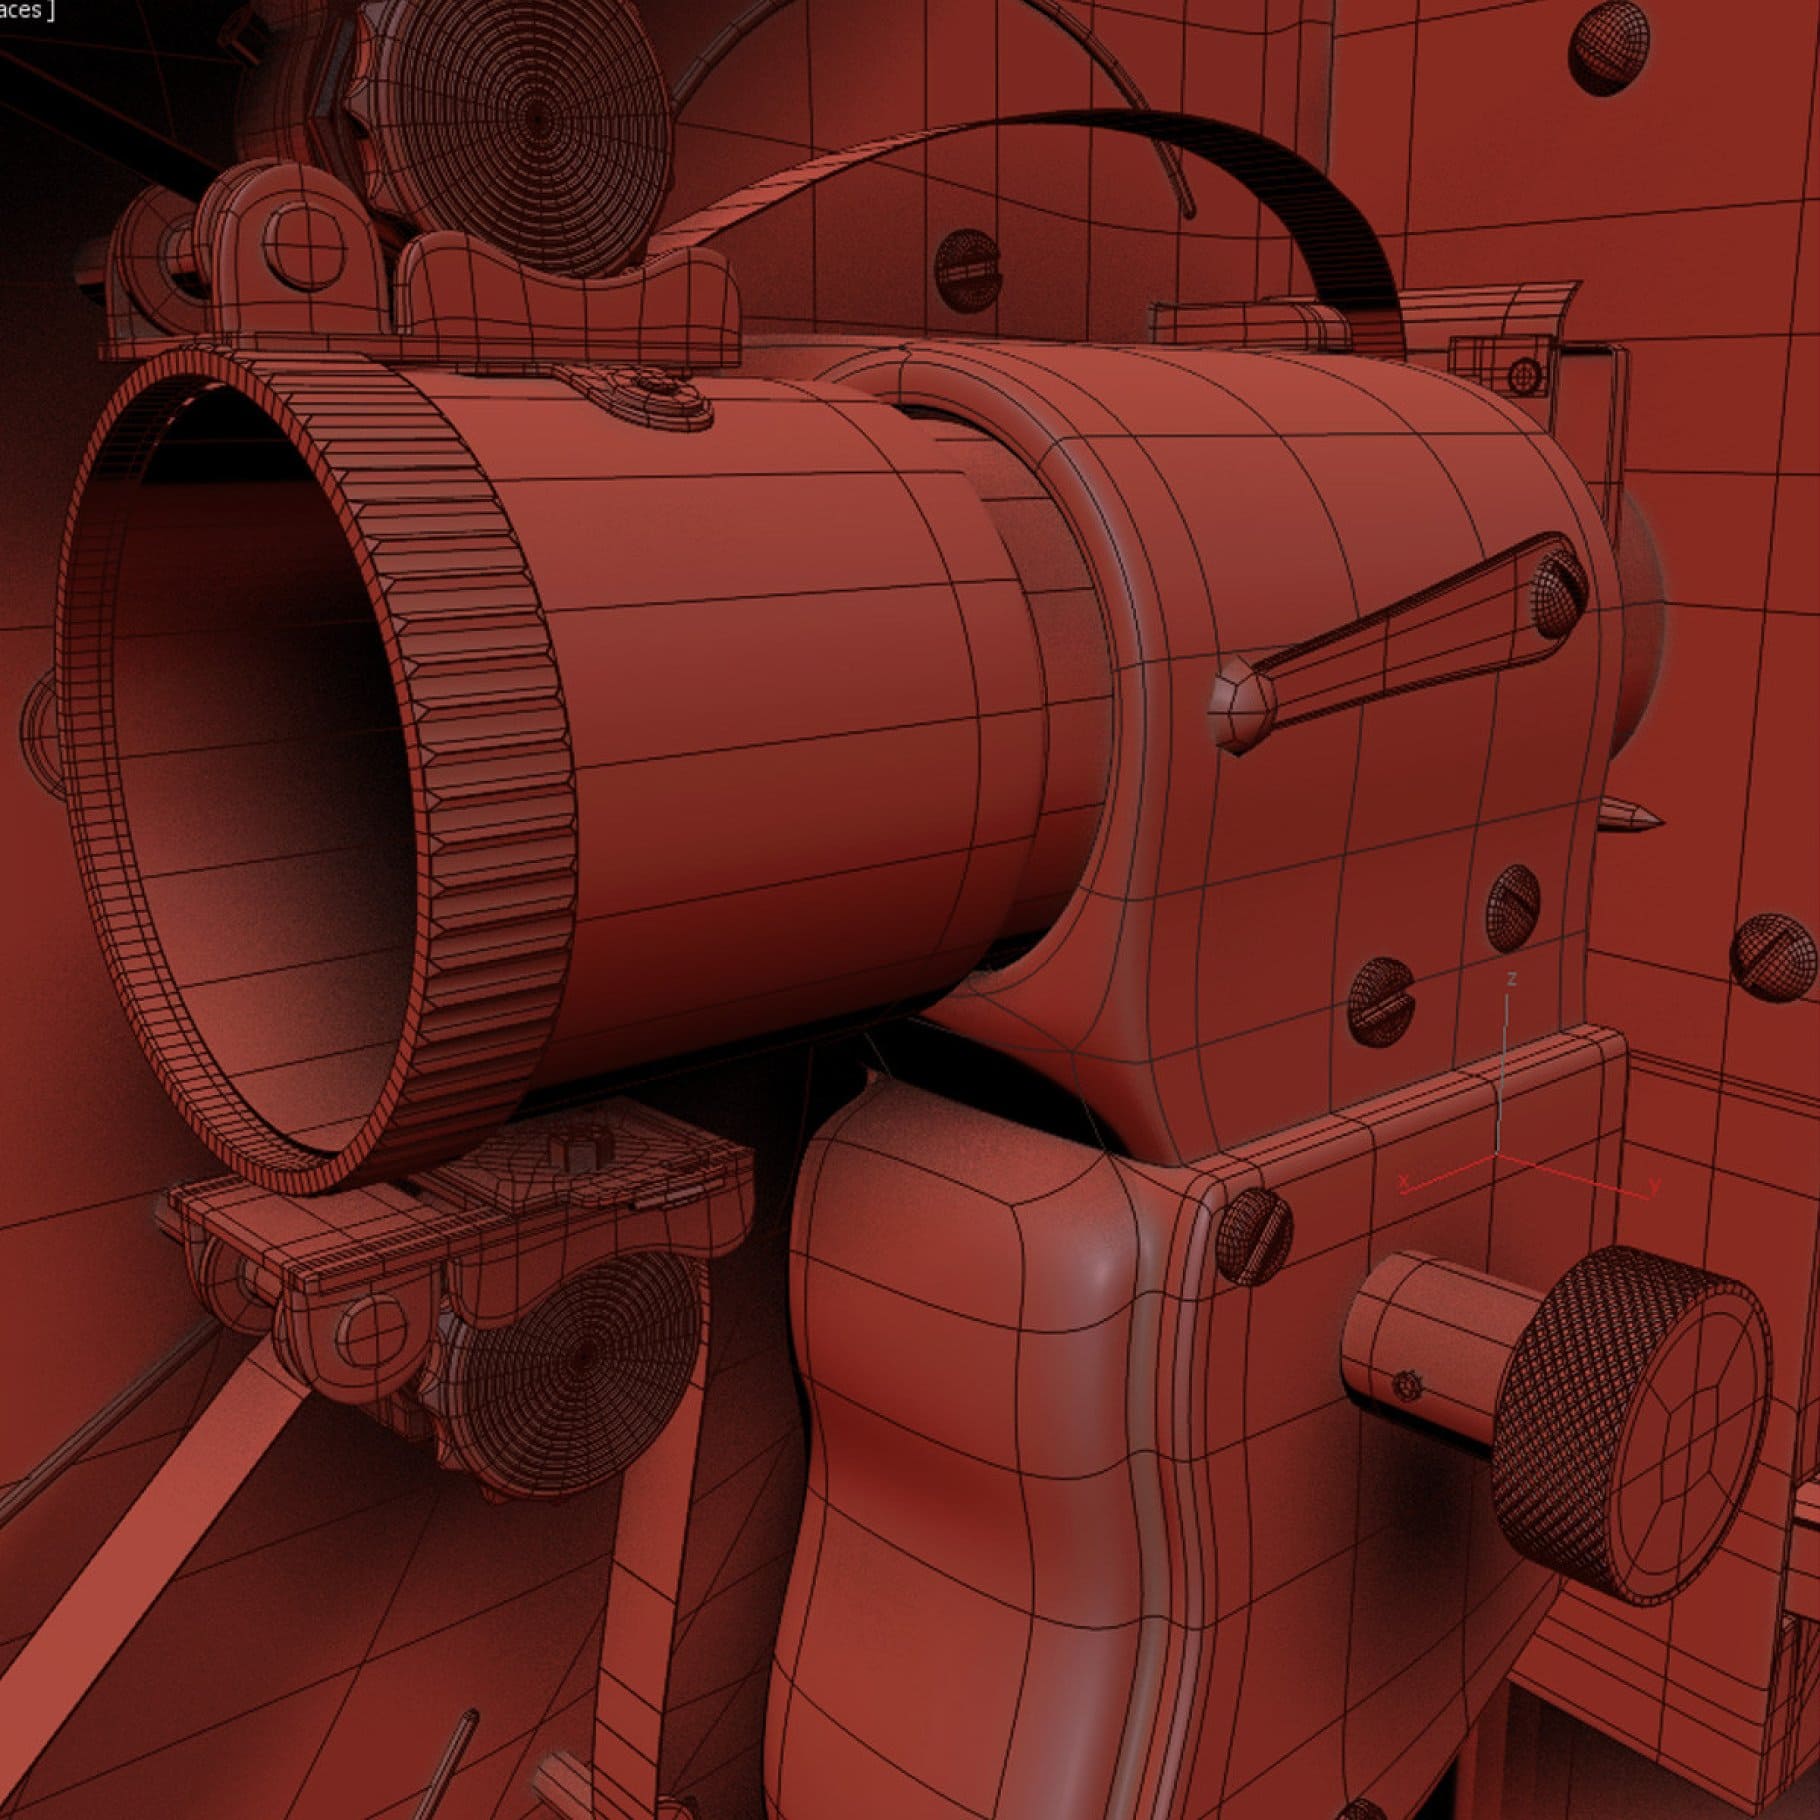 3D model of the projector lens.